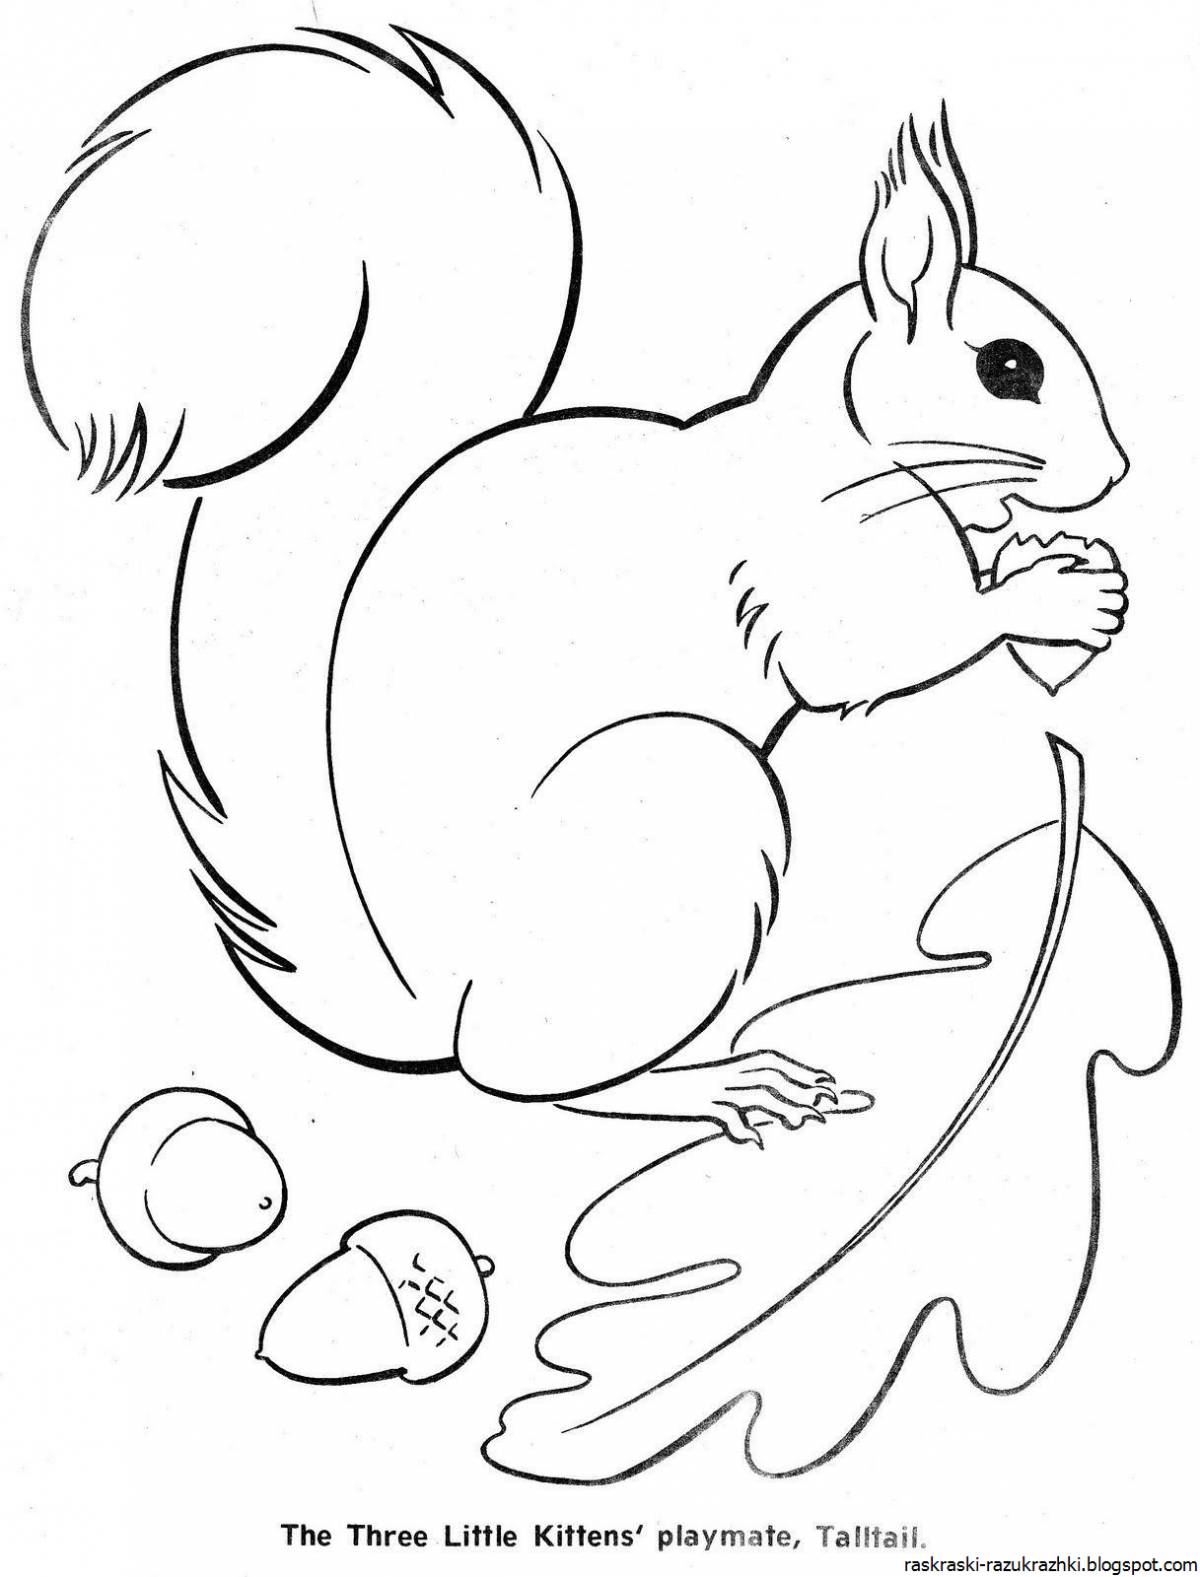 Giggly squirrel coloring book for kids